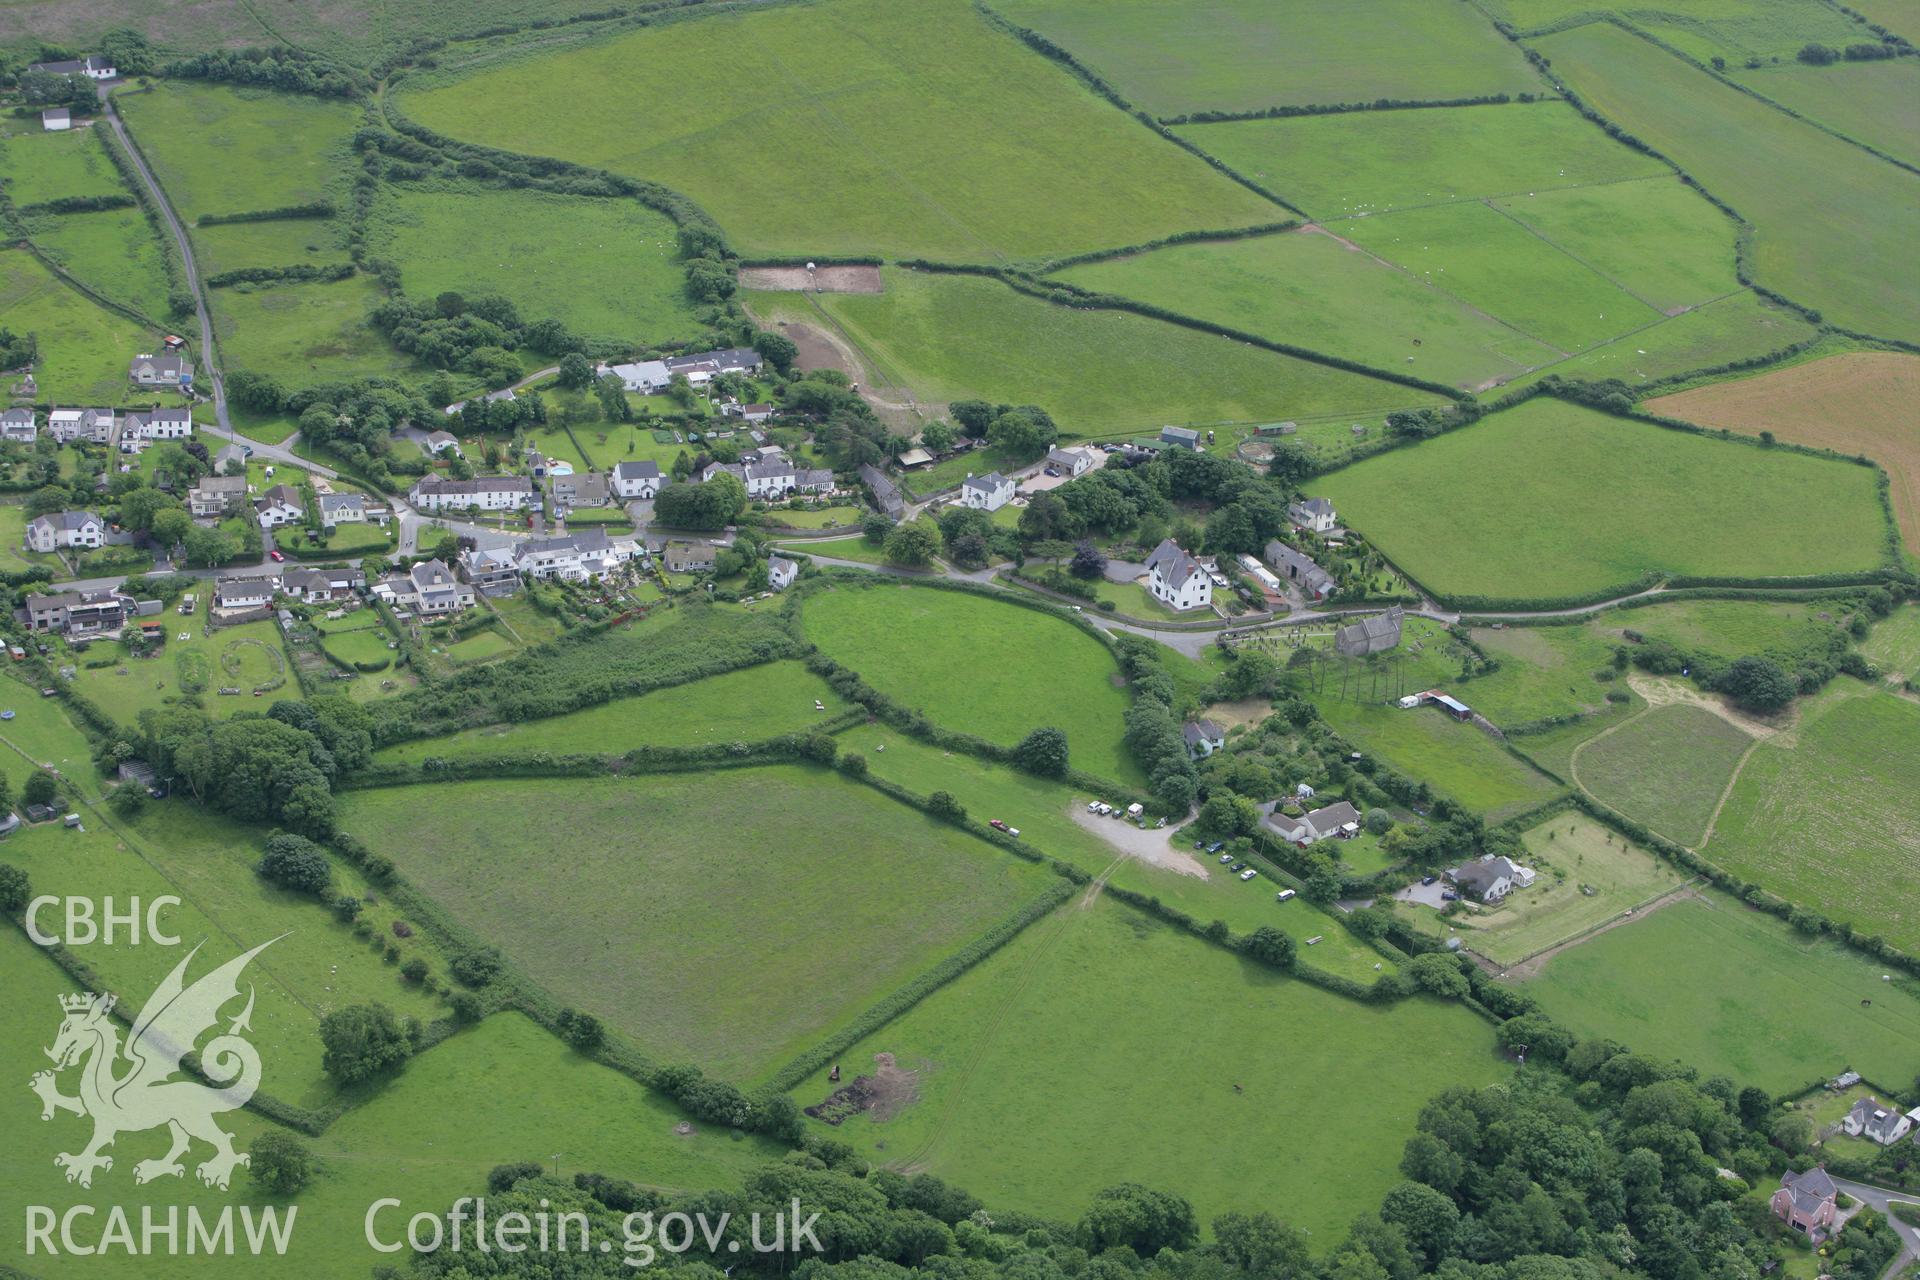 RCAHMW colour oblique photograph of Llandmadog village, with St Madoc's Church. Taken by Toby Driver on 20/06/2008.